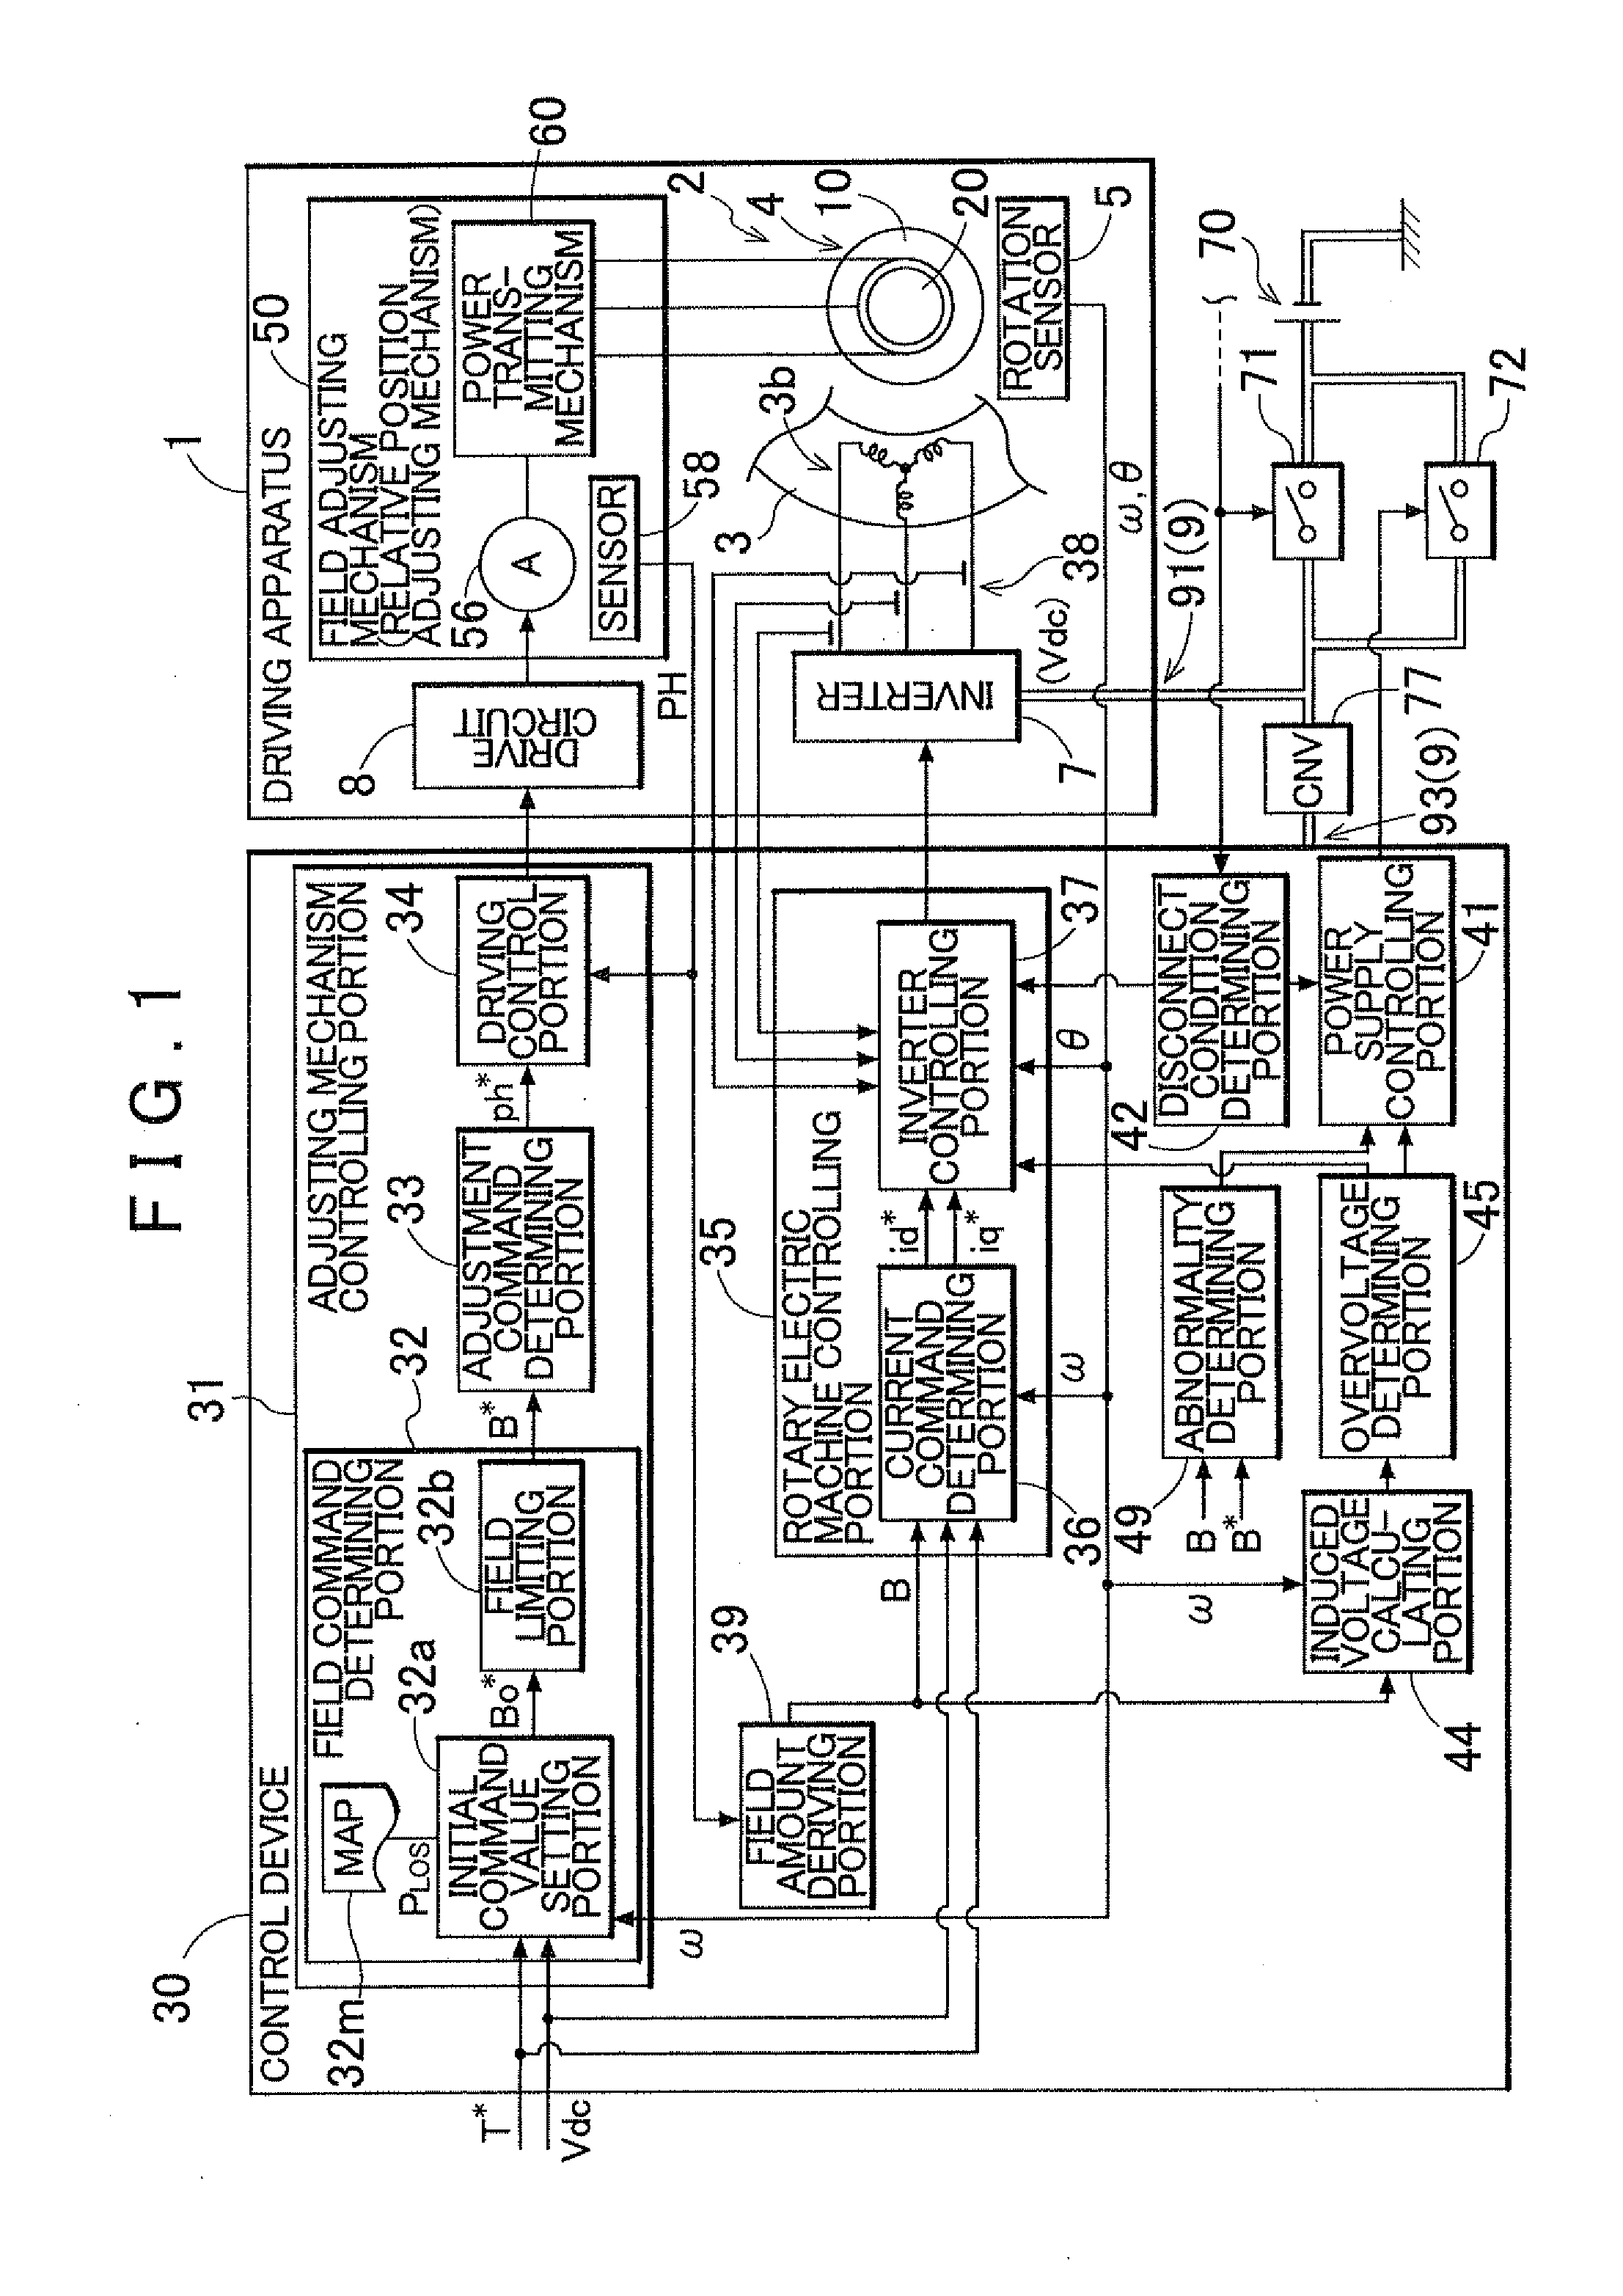 Control device of a driving apparatus